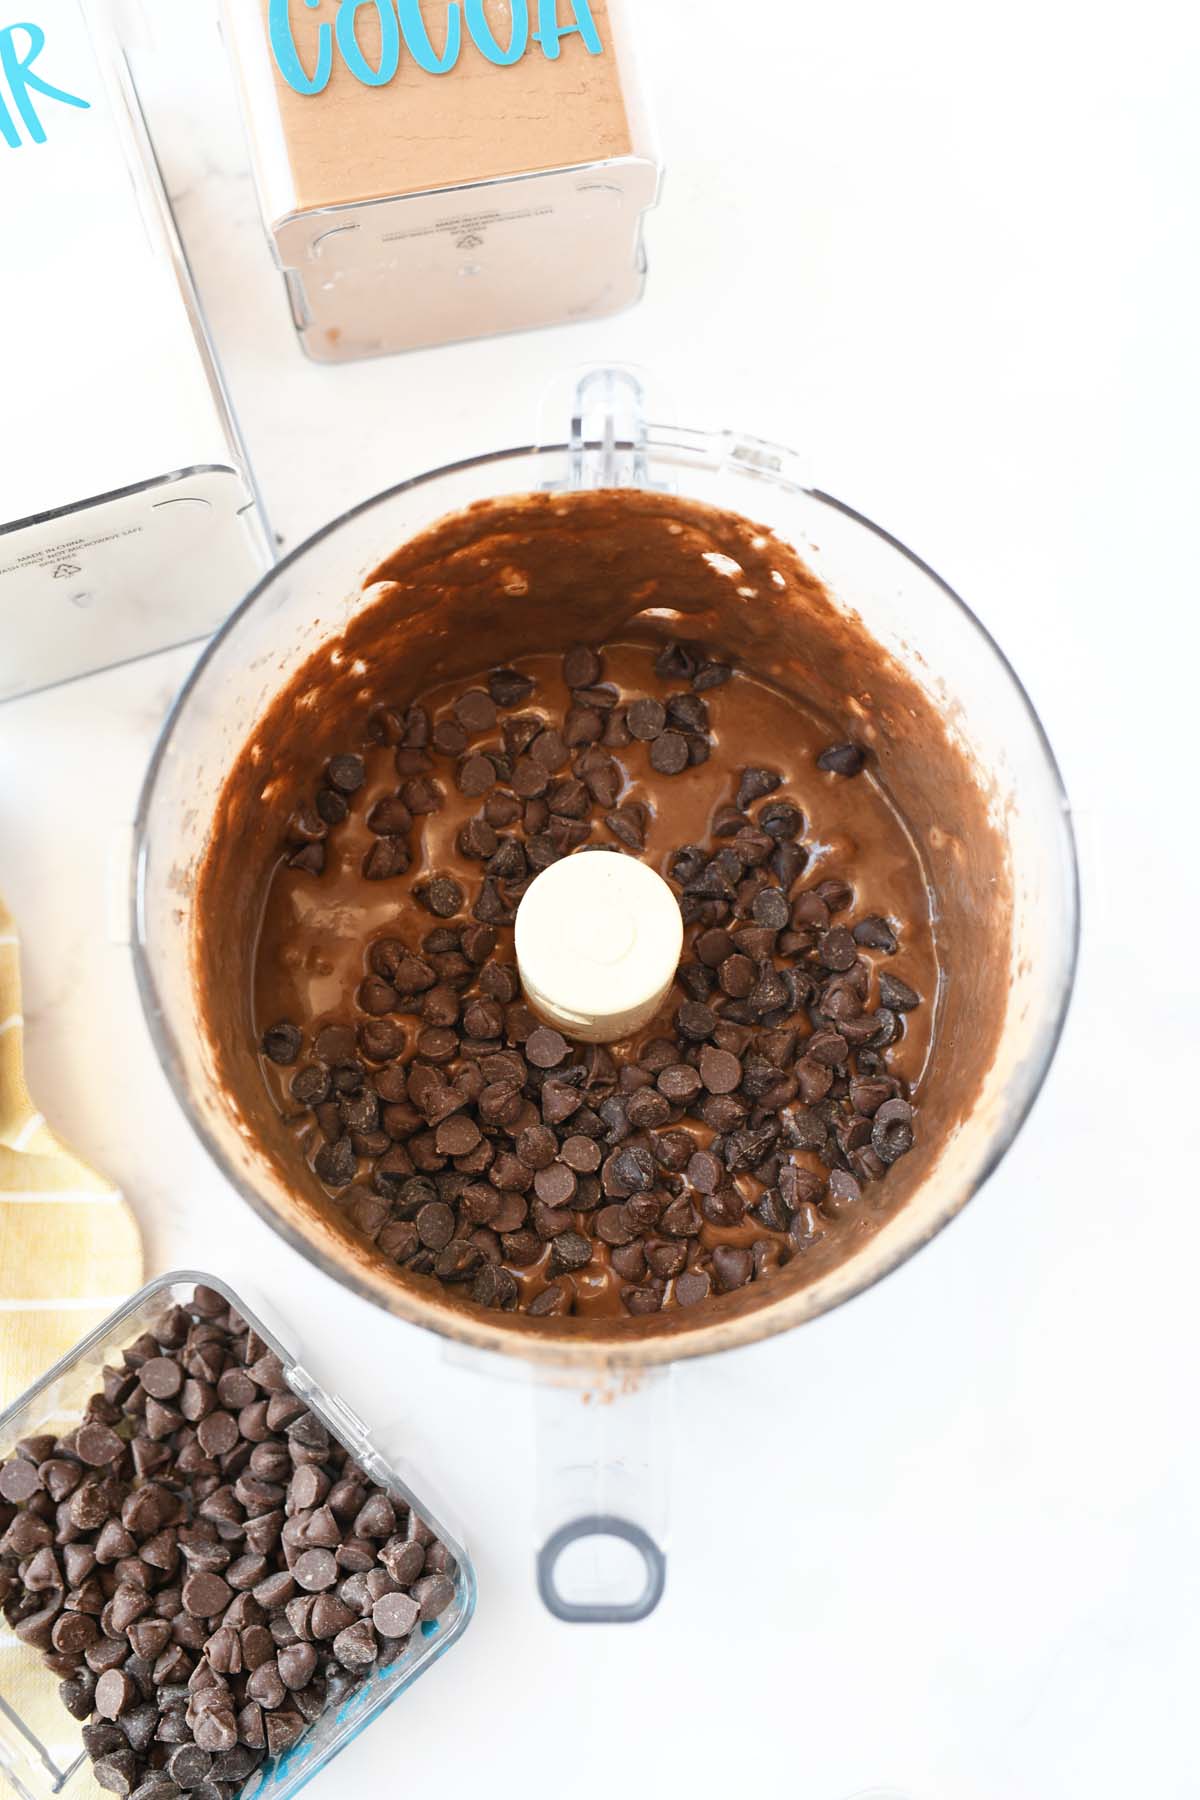 Chocolate chips in a food processor.